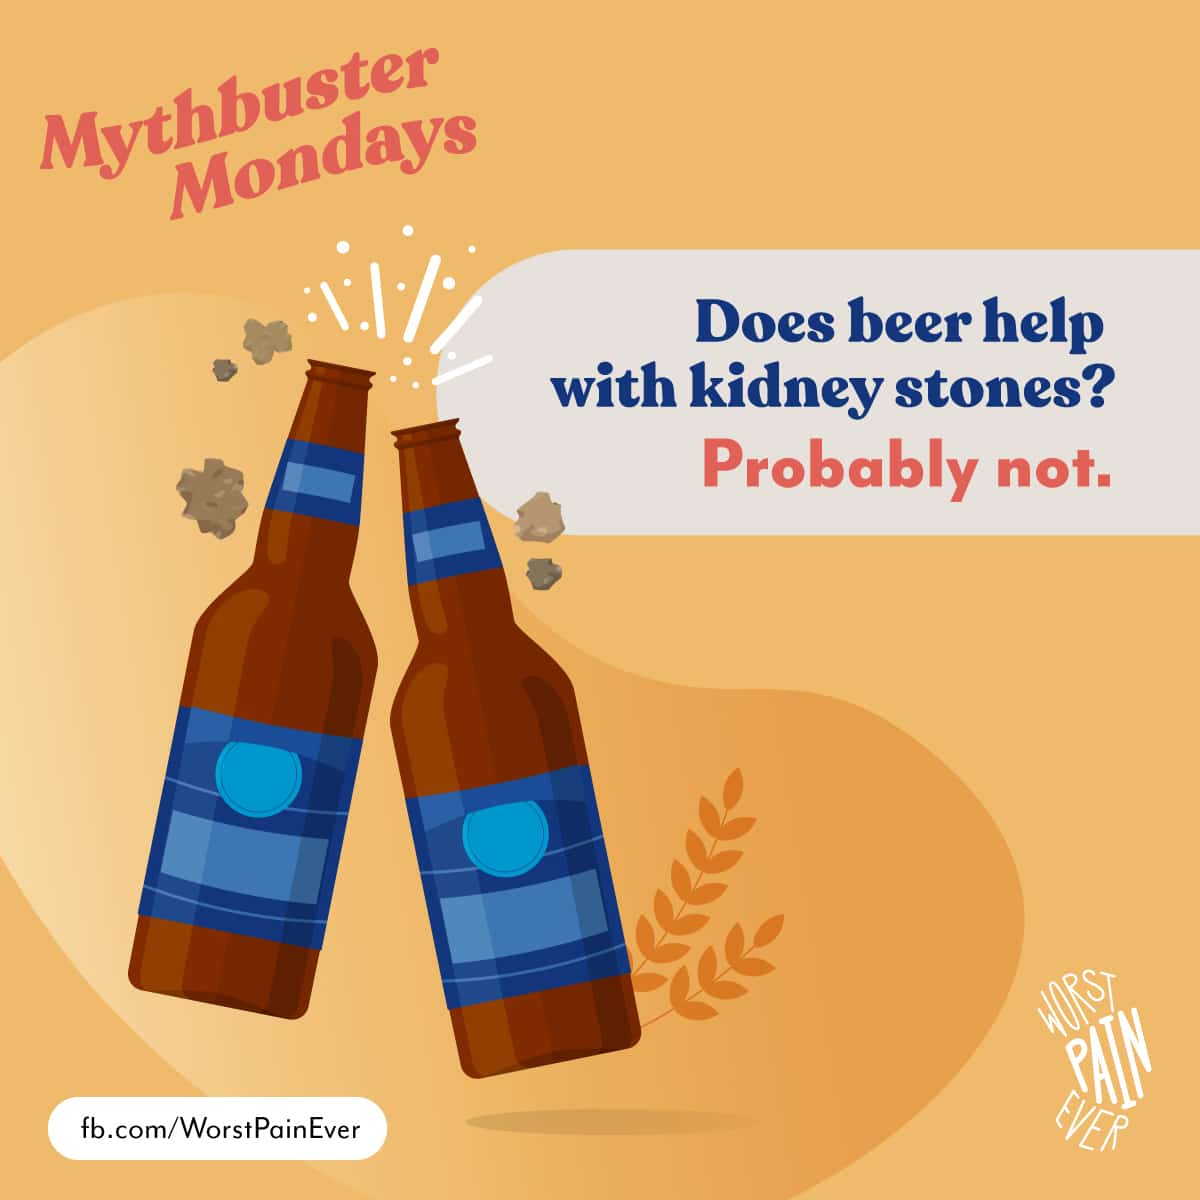 Does beer help with kidney stones? Probably not.